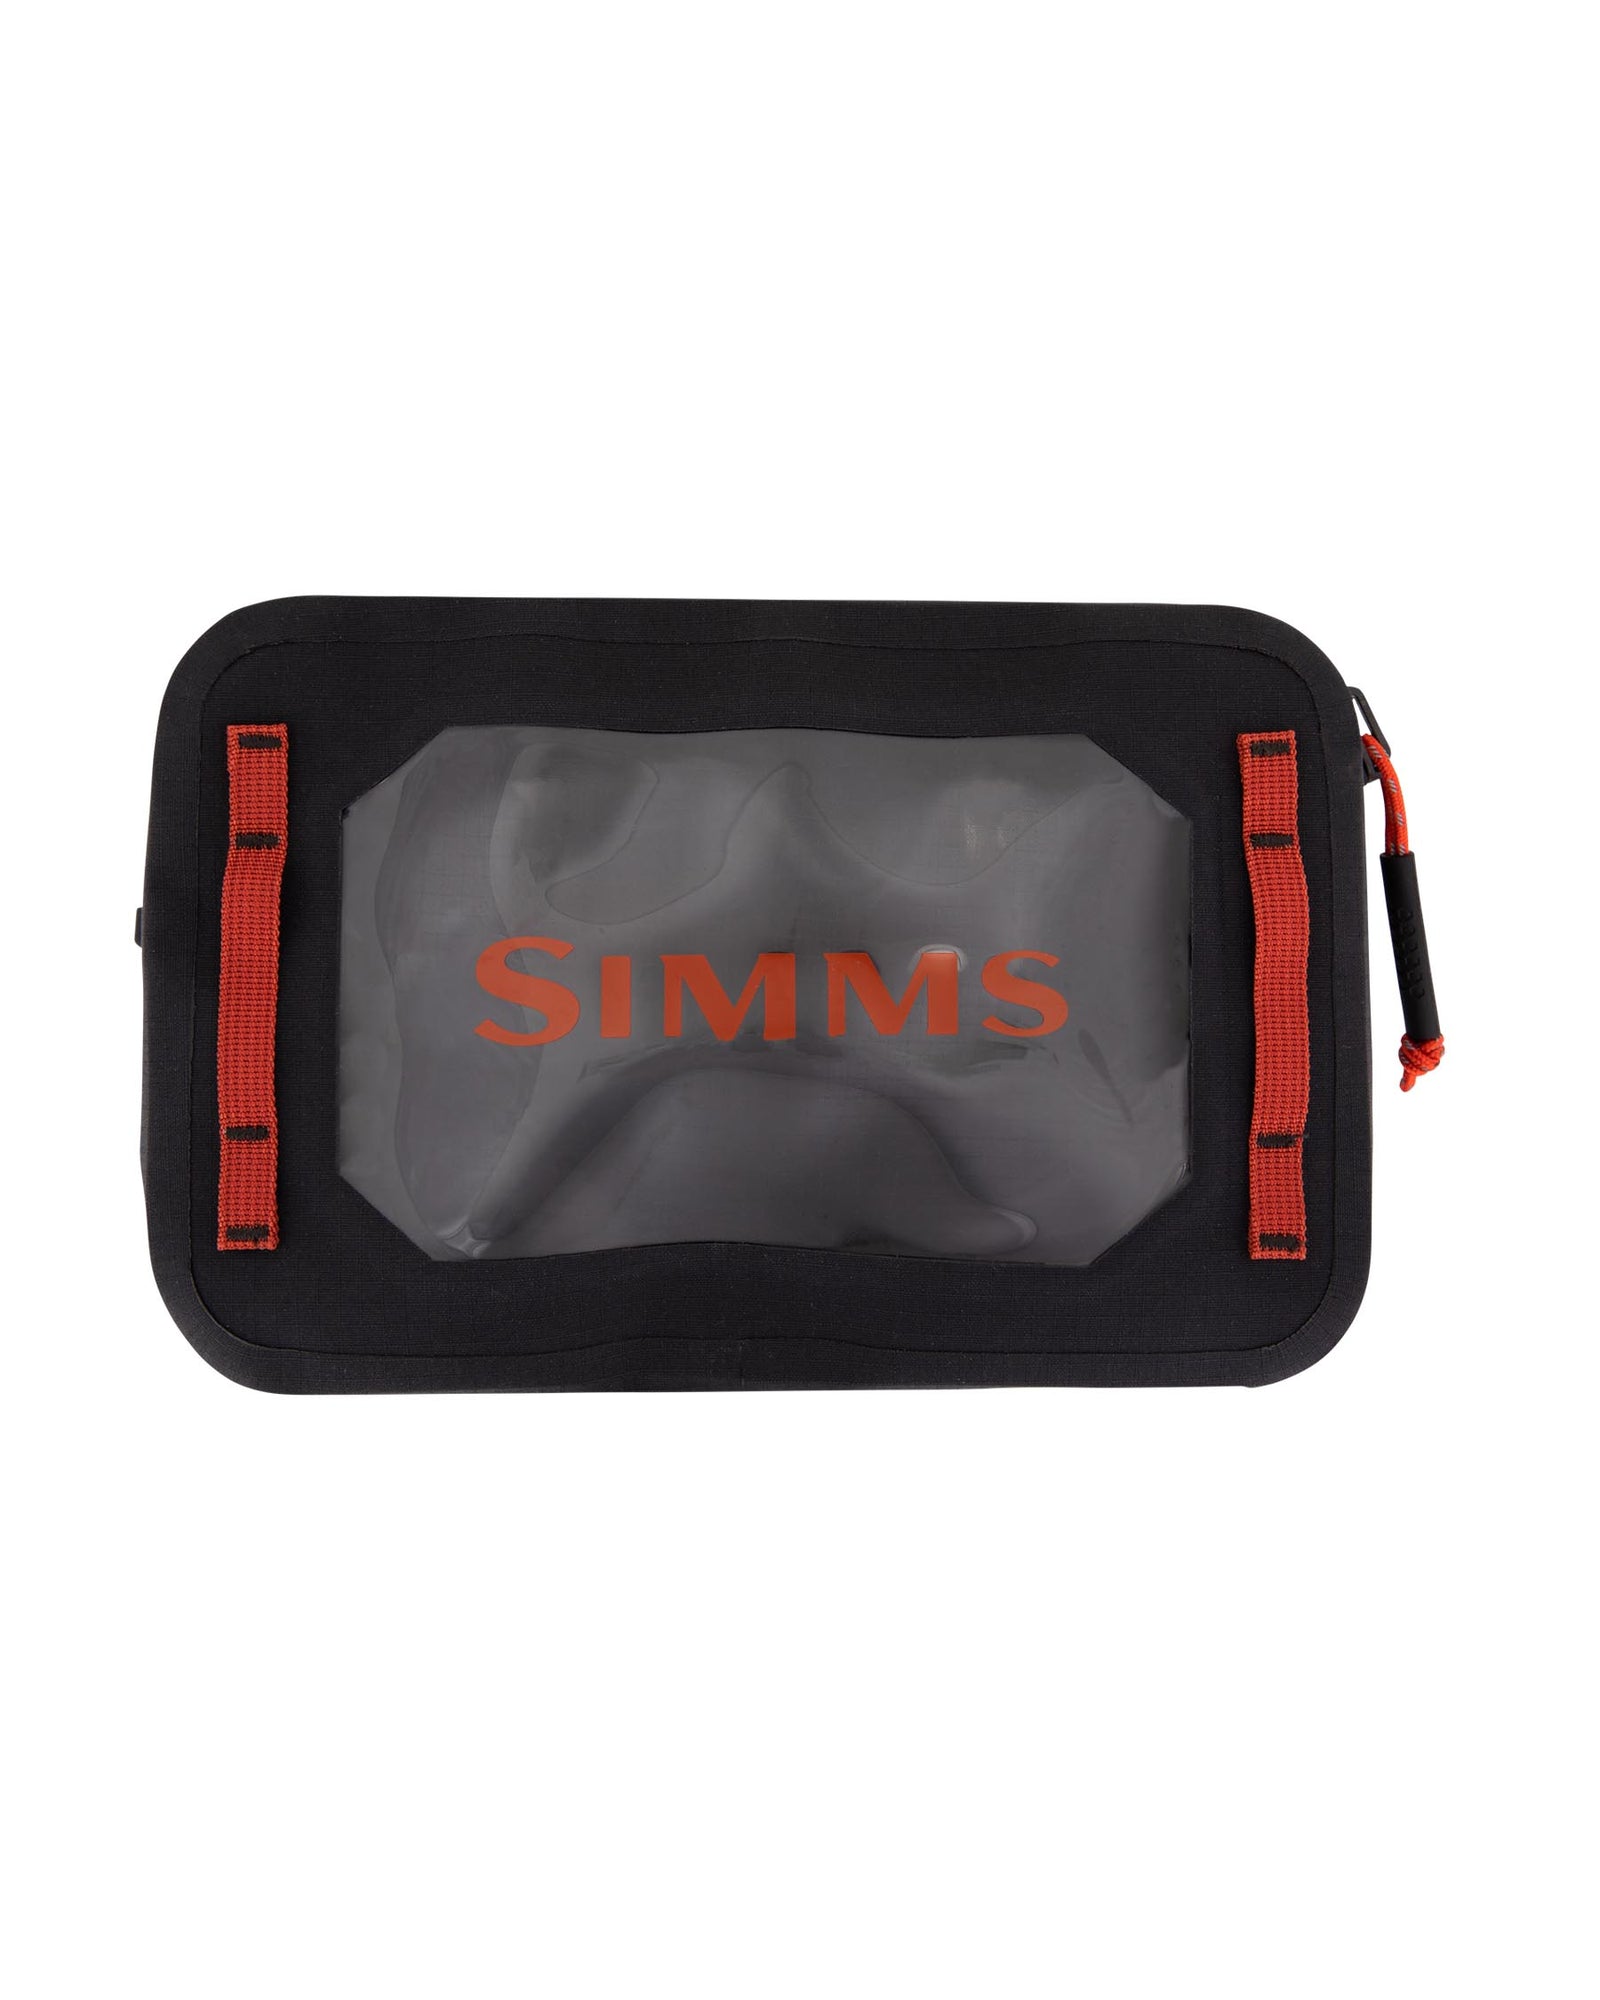 Bags & Packs Tagged Simms - Fin & Fire Fly Shop